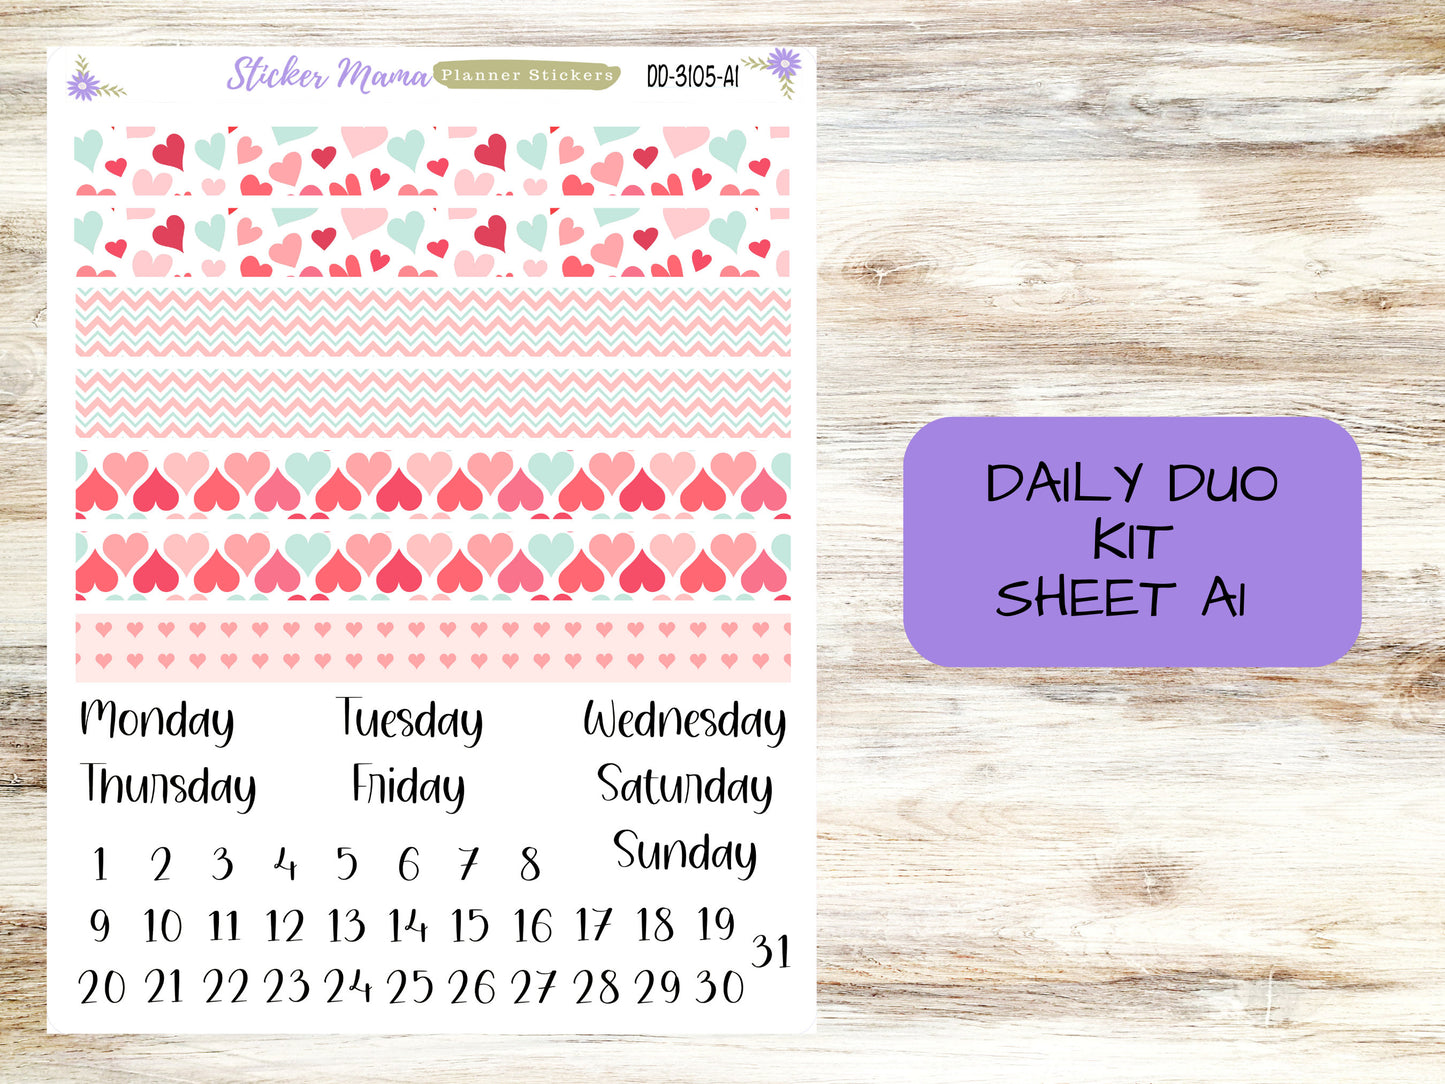 DAILY DUO 7x9-Kit #3105  || Hello, Love!  || Planner Stickers - Daily Duo 7x9 Planner - Daily Duo Stickers - Daily Planner